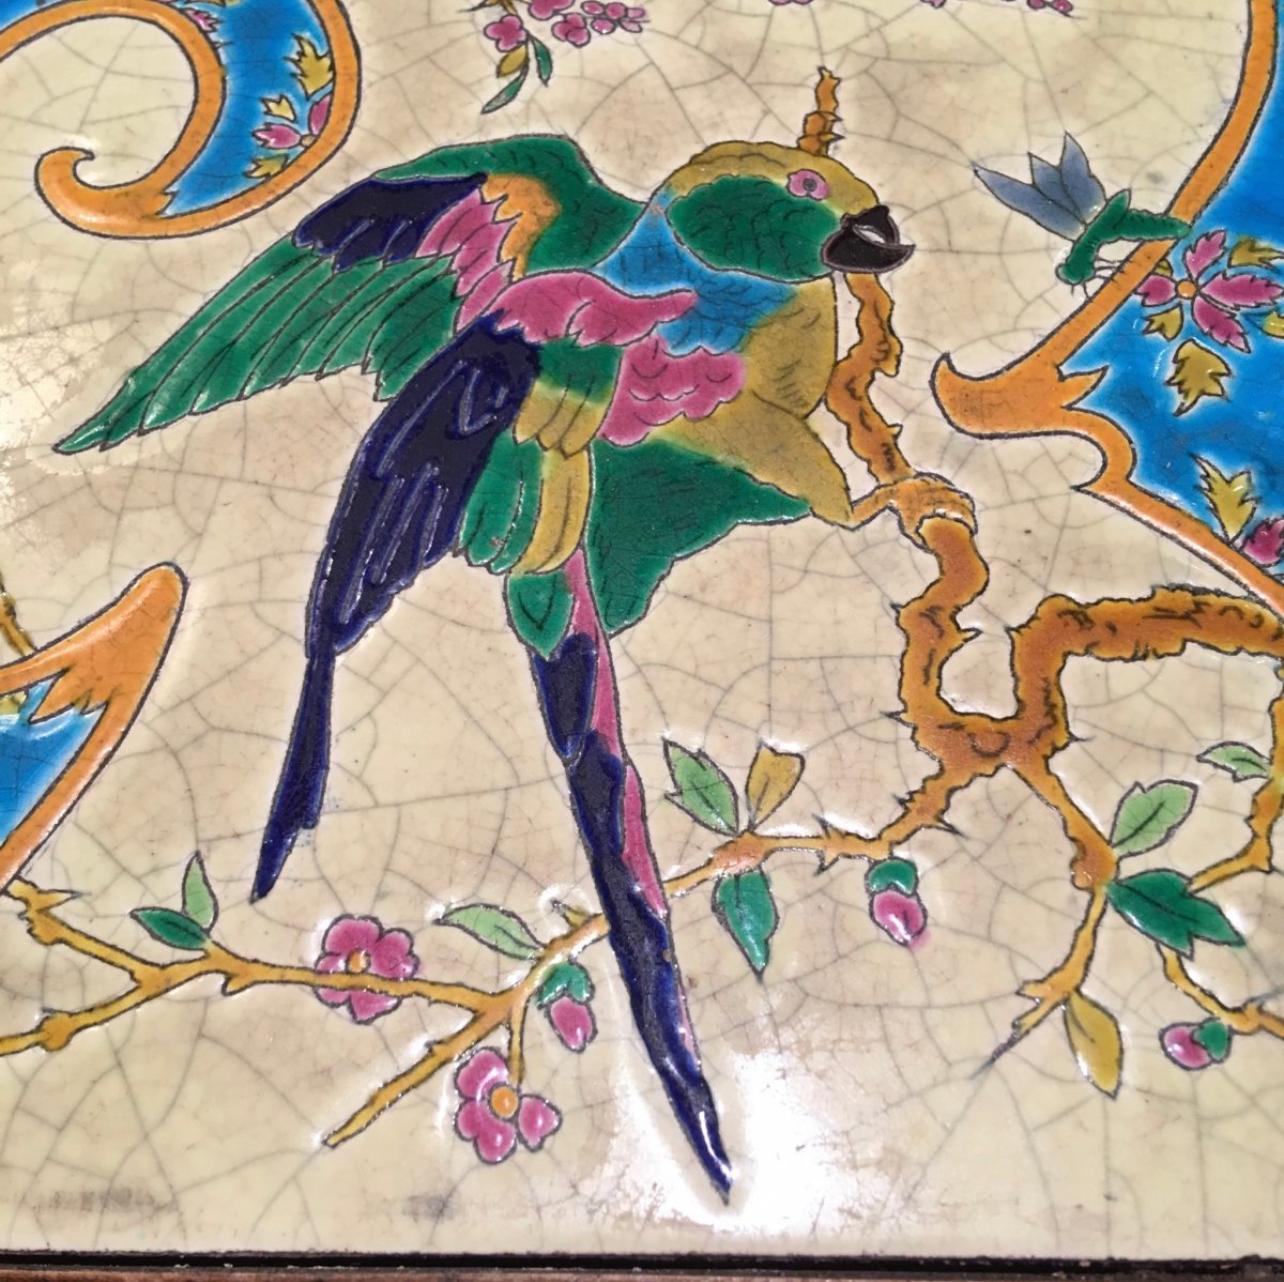 1900s musical trivet, with Longwy enamels decorated with parrot and butterfly. Beautiful colors, works perfectly and very good condition. The little label below where the name of the nursery rhyme is written is no longer there.